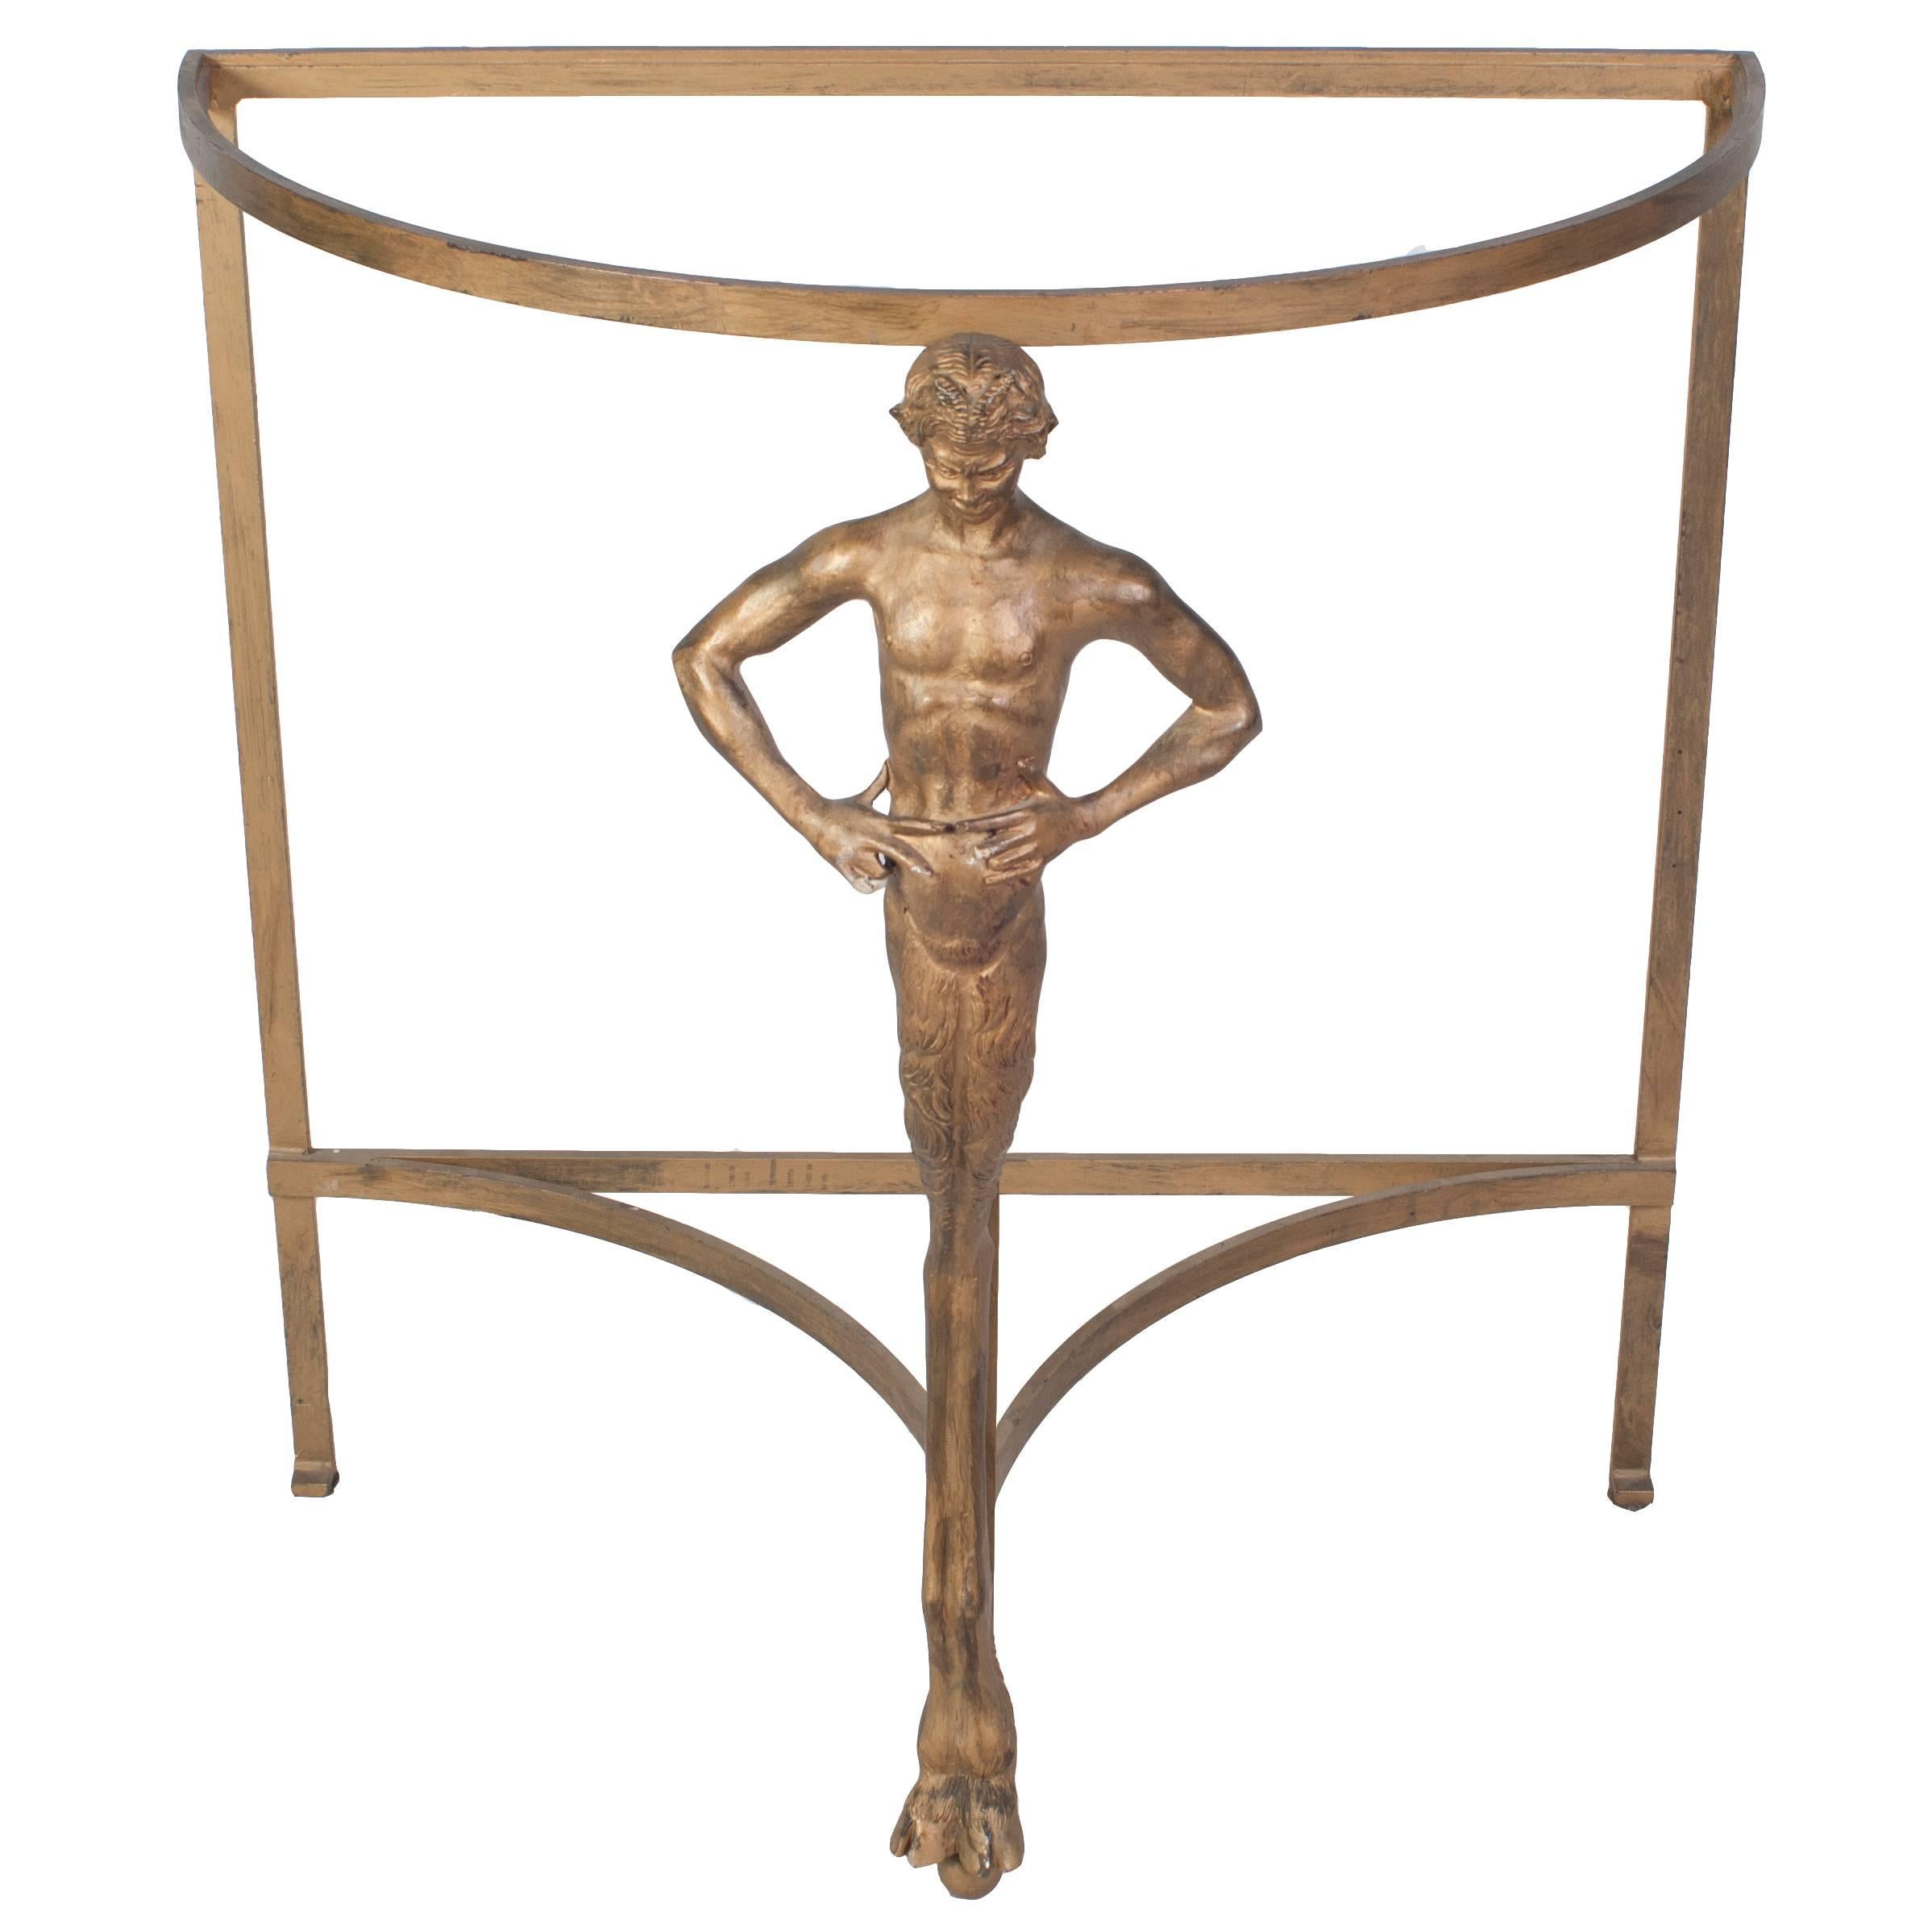 Metal Demilune Table with a Faun Leg and Glass Top